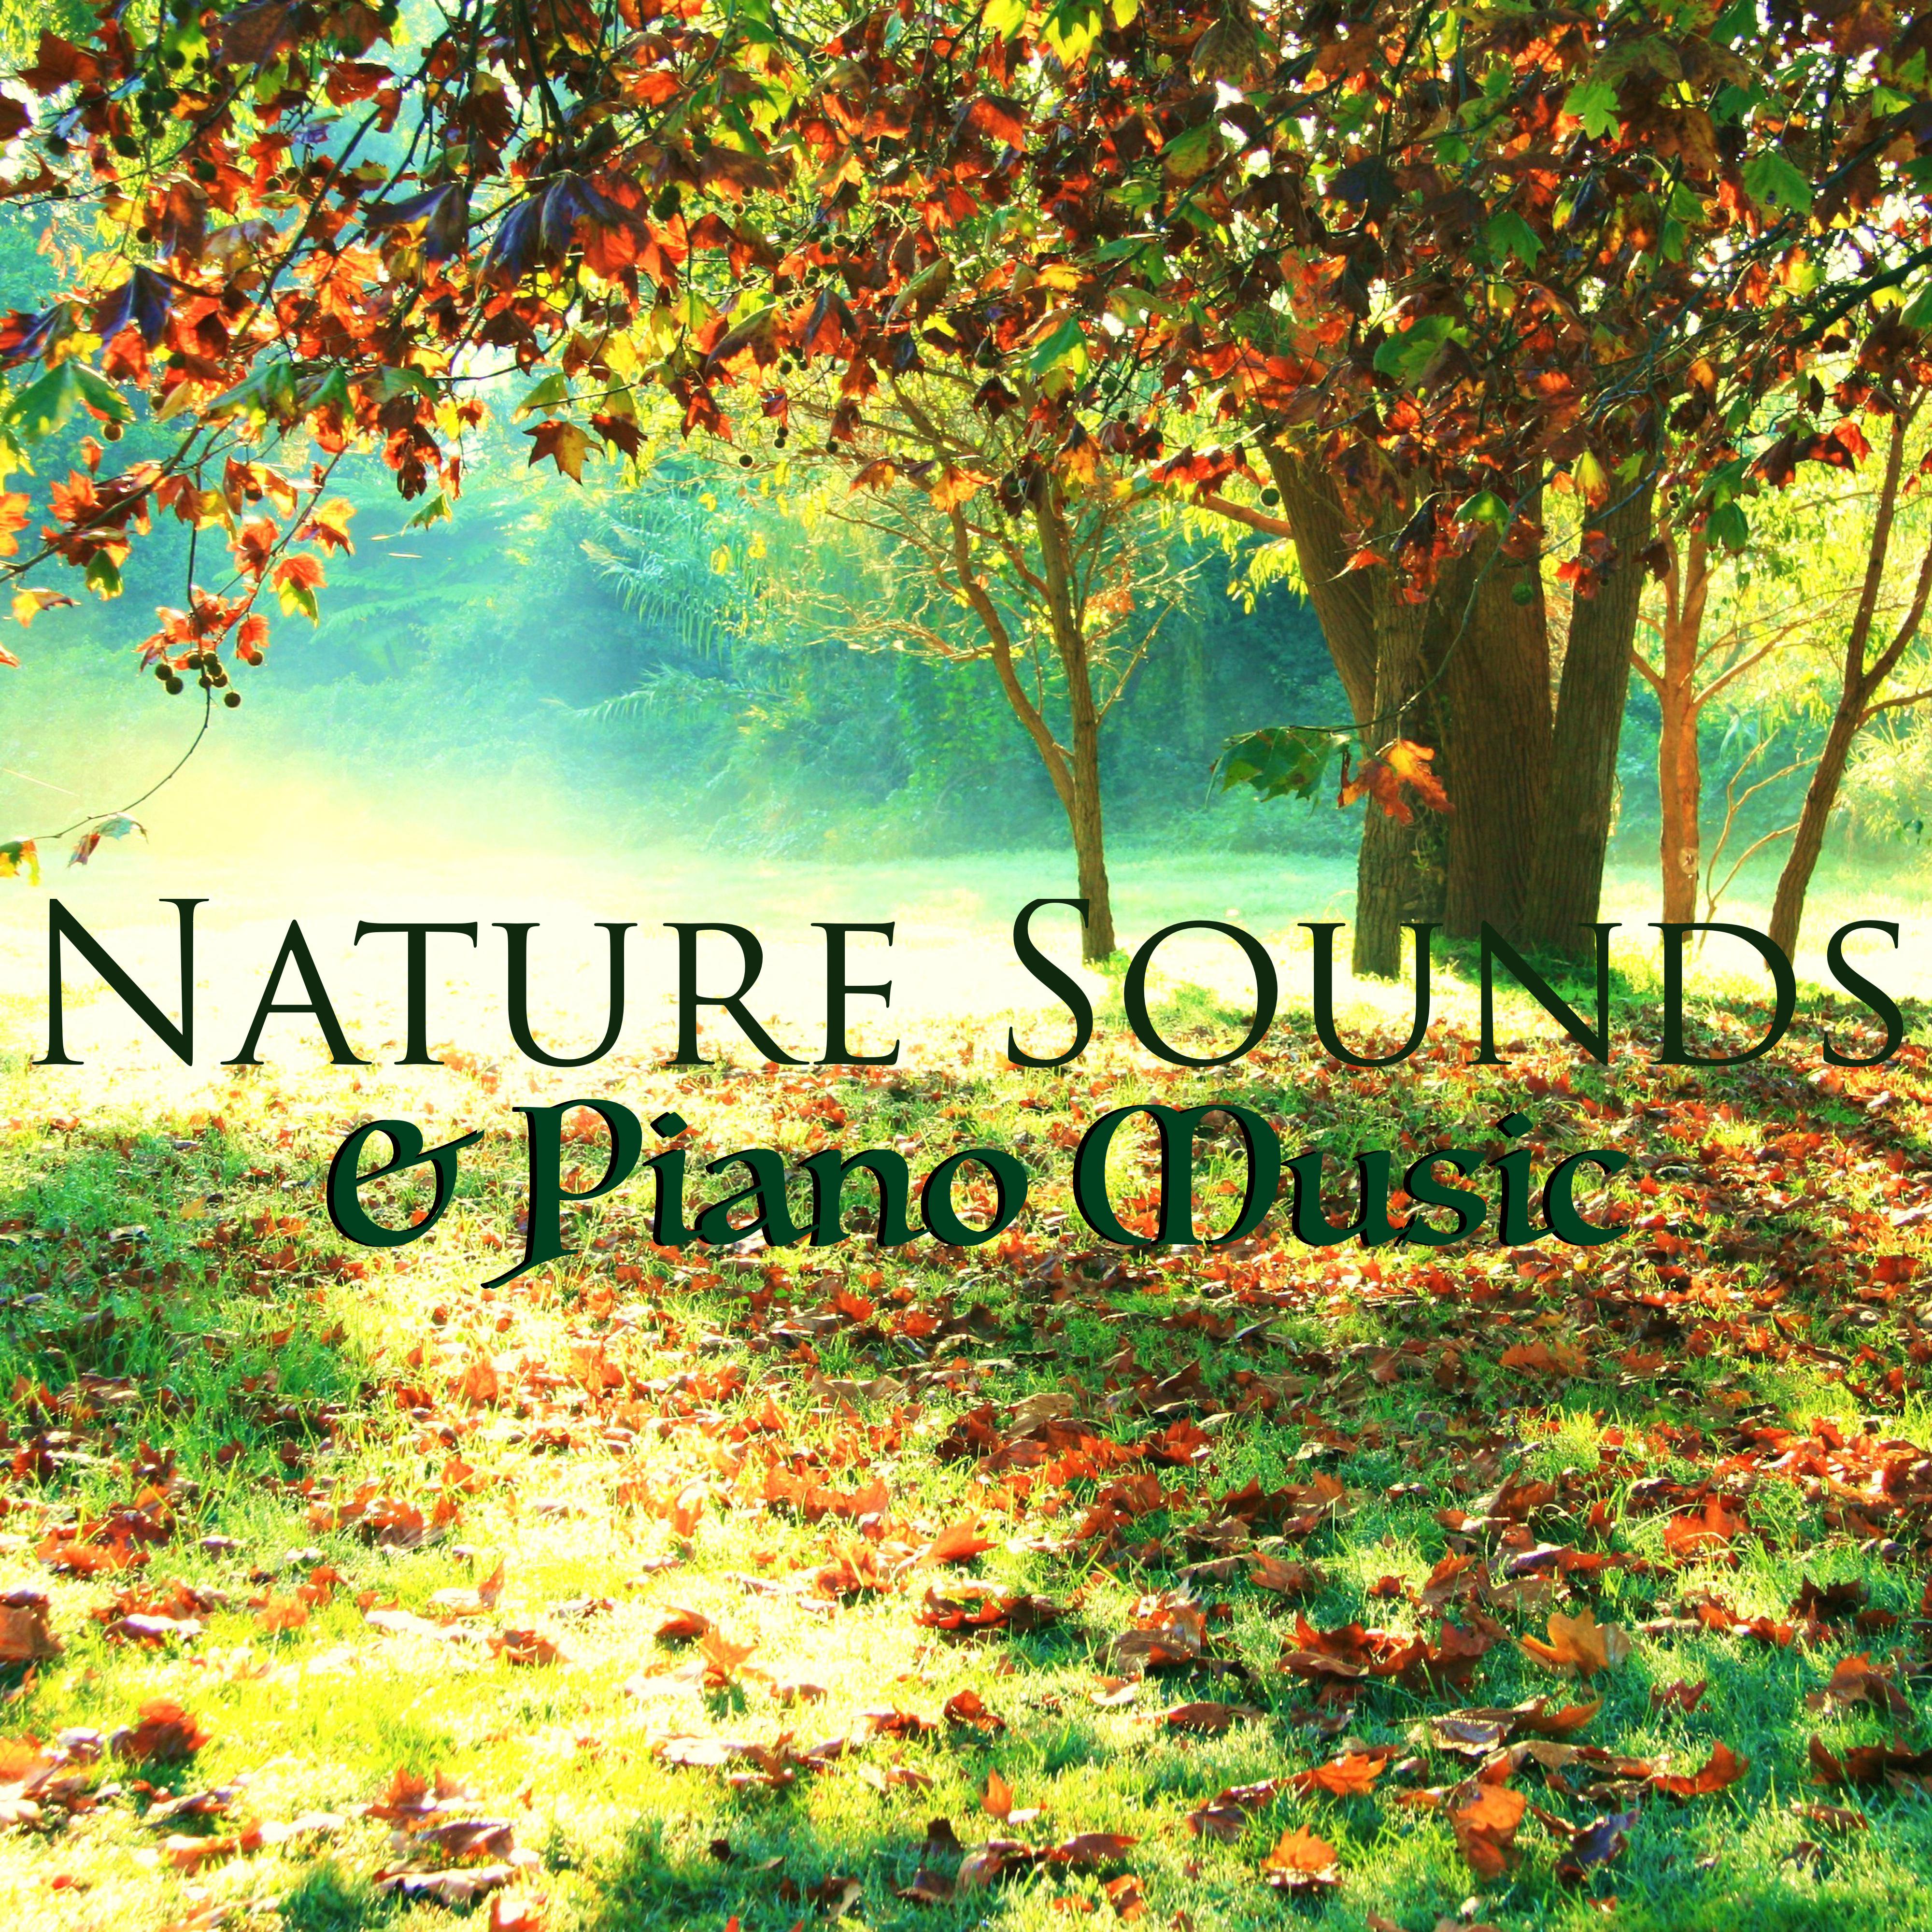 Nature Sounds & Piano Music - Relaxing Meditation Music with Sound of Nature